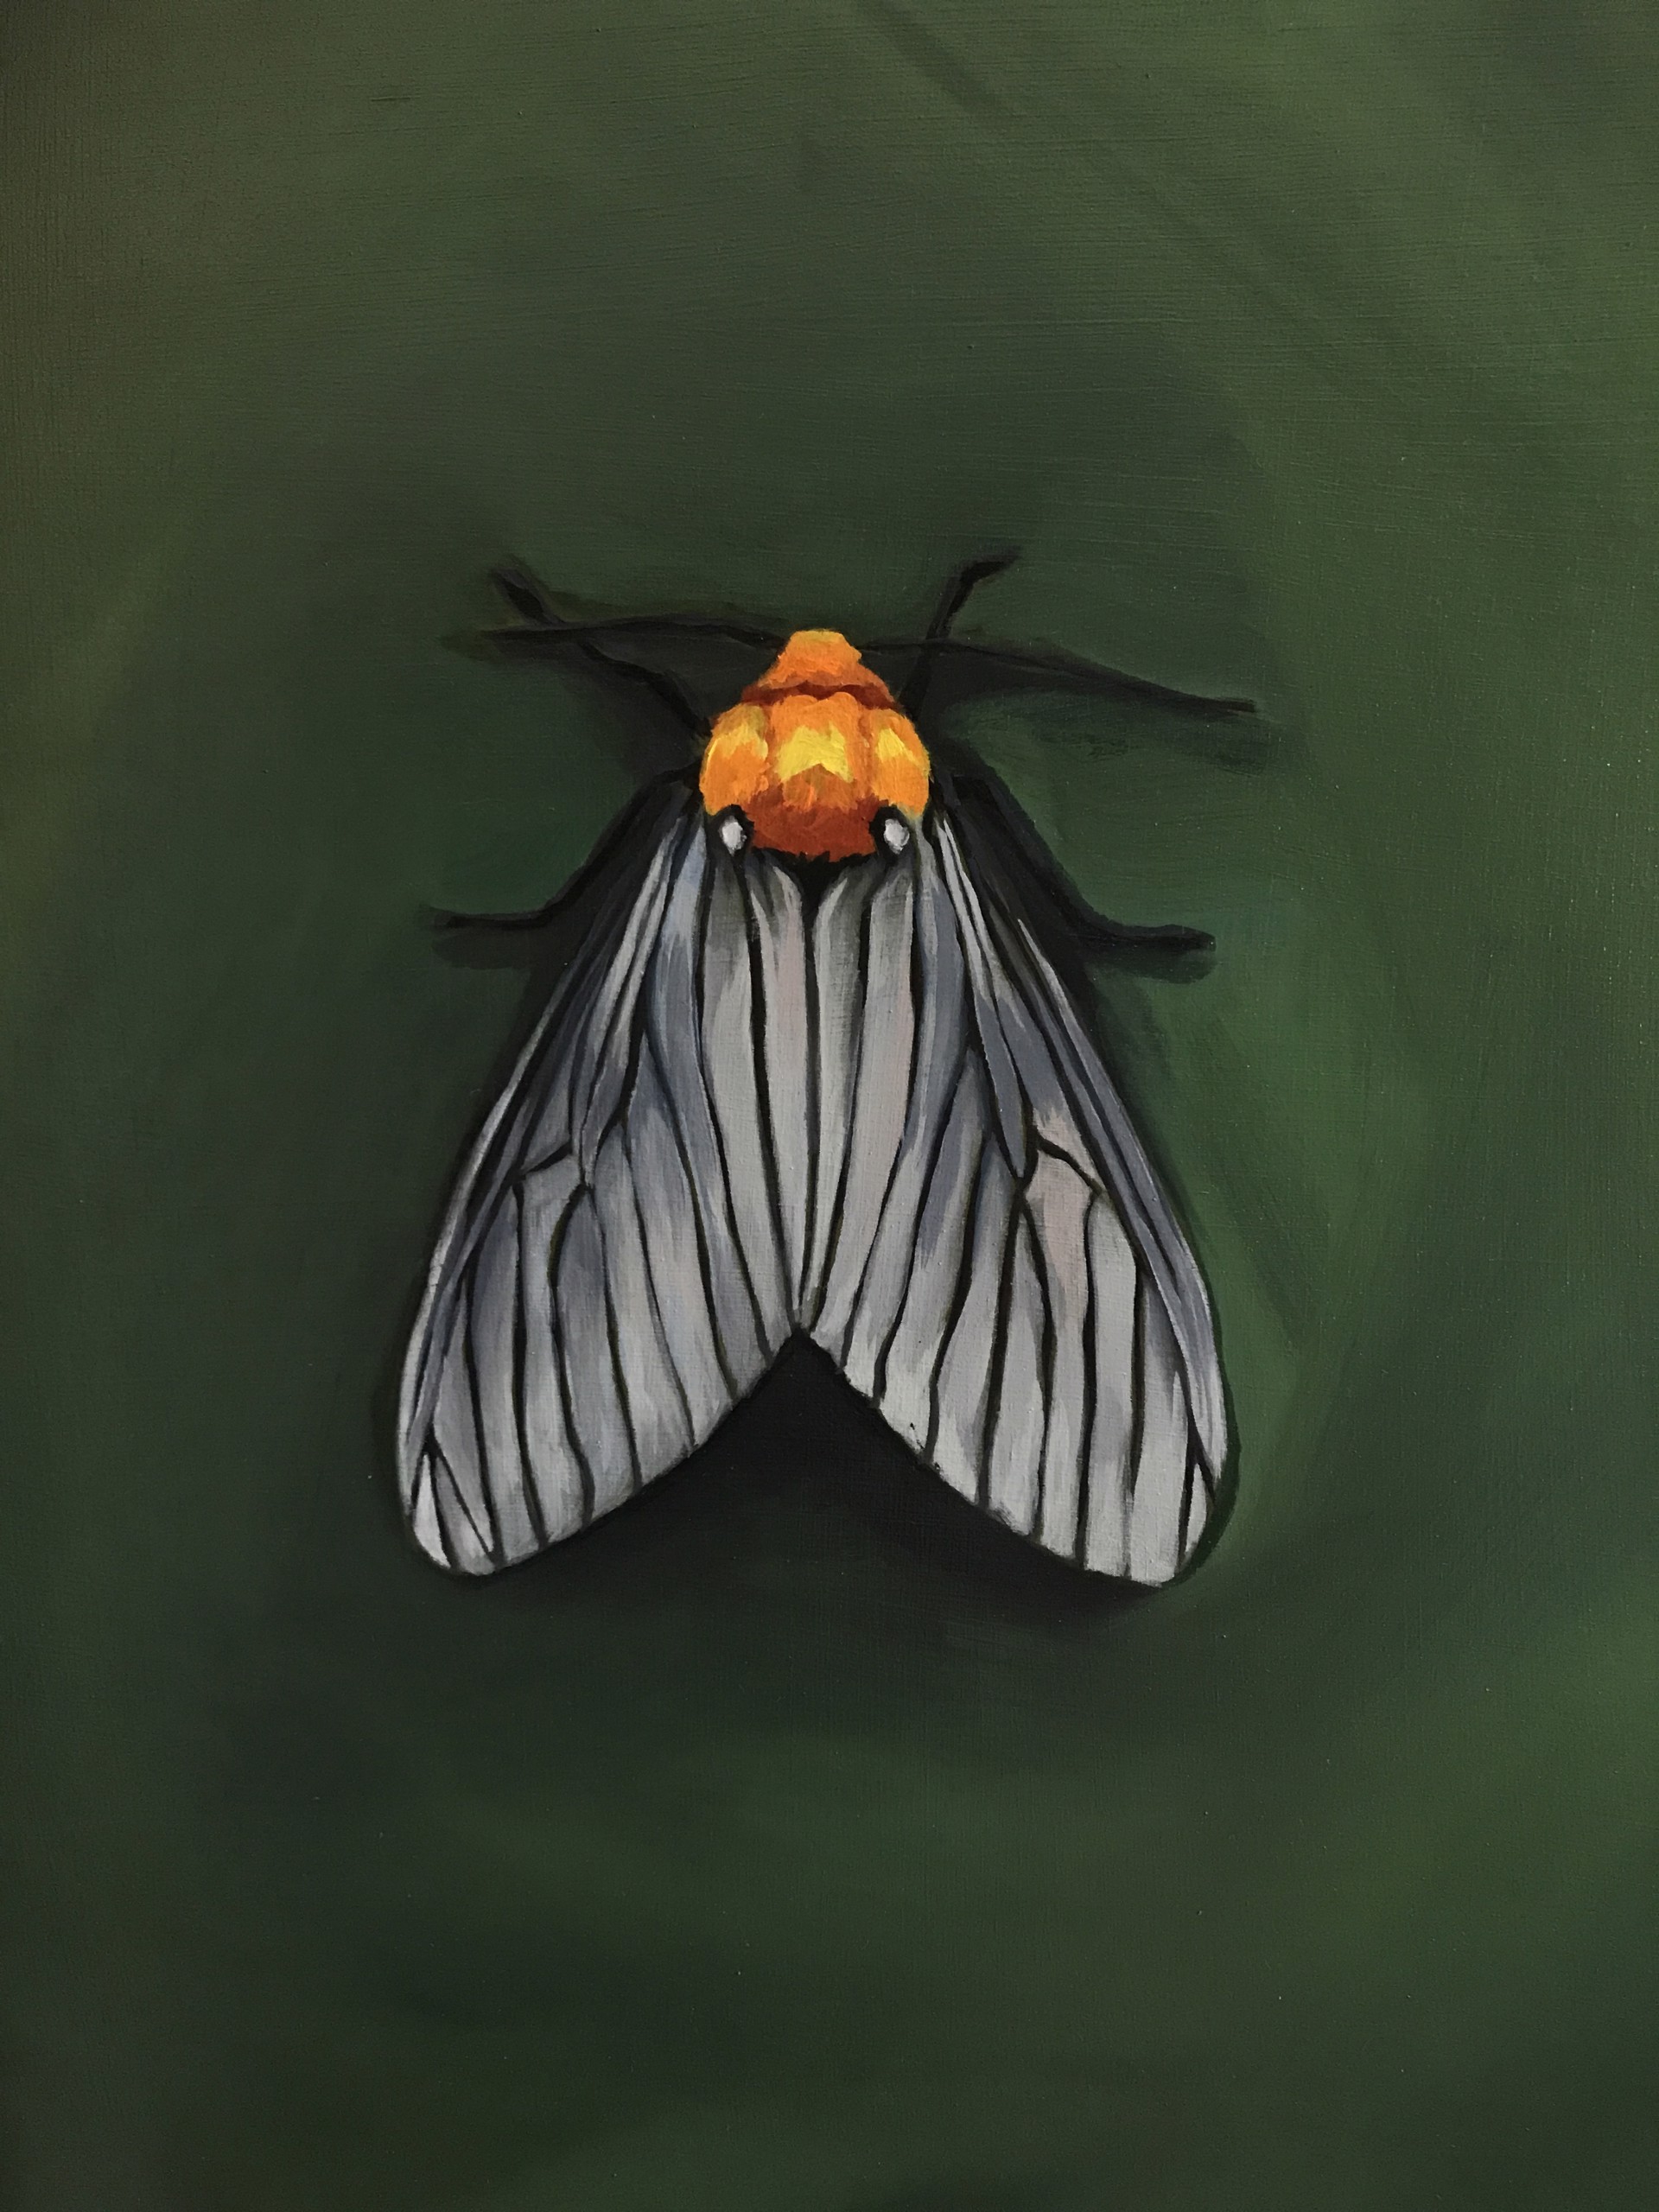 Arctiid Moth by Noelle Holler